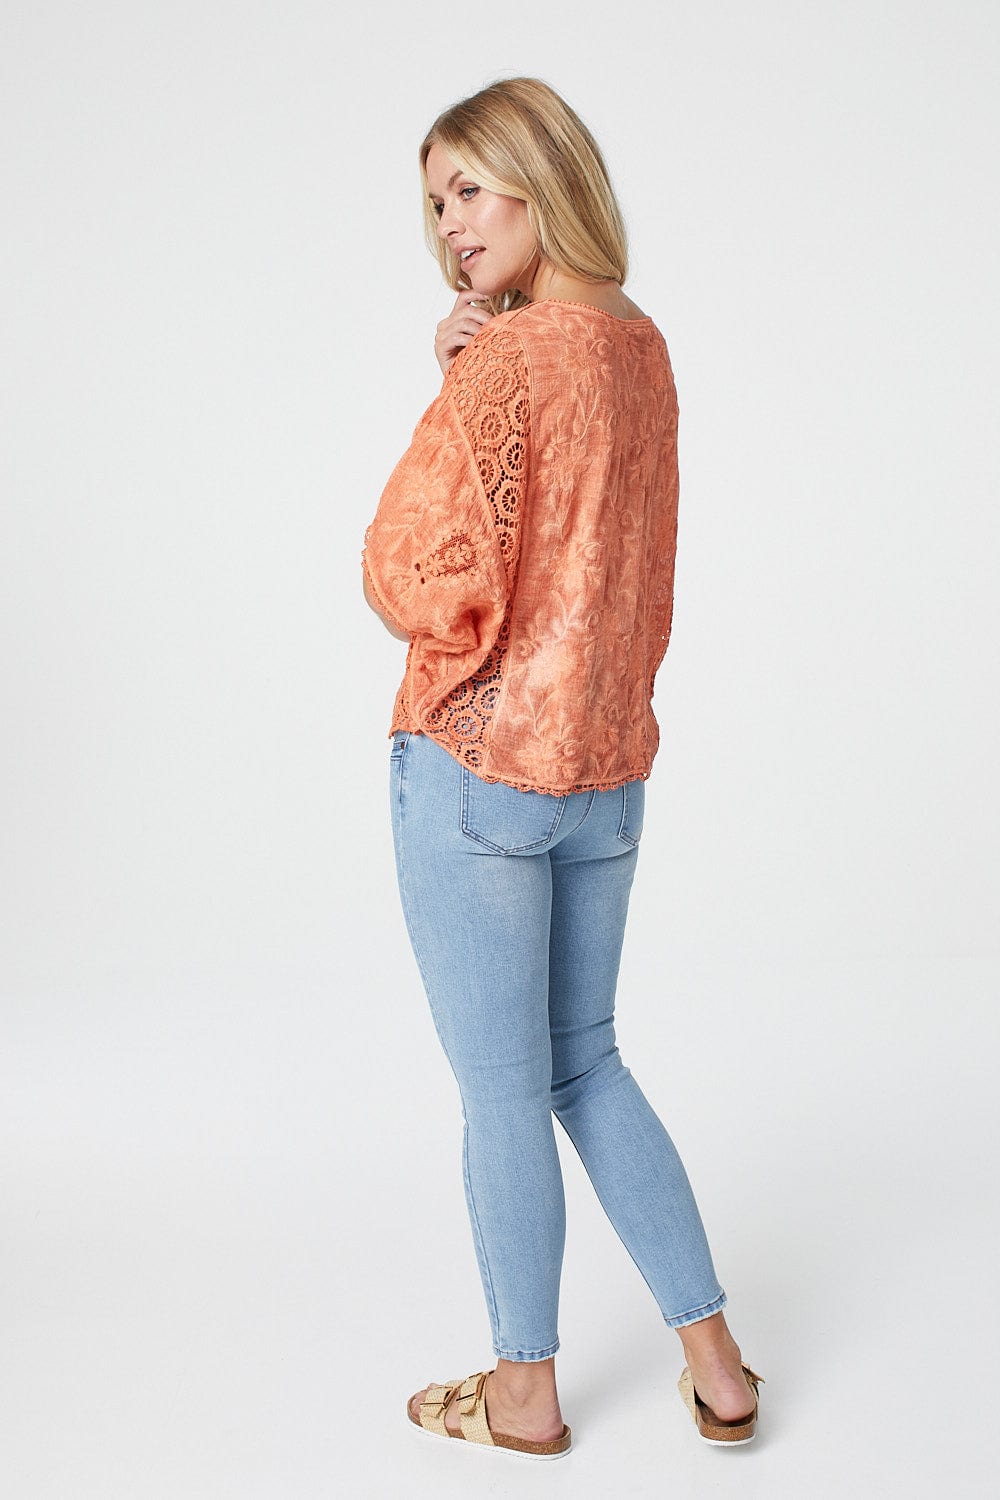 Orange | Embroidered Lace Batwing Top